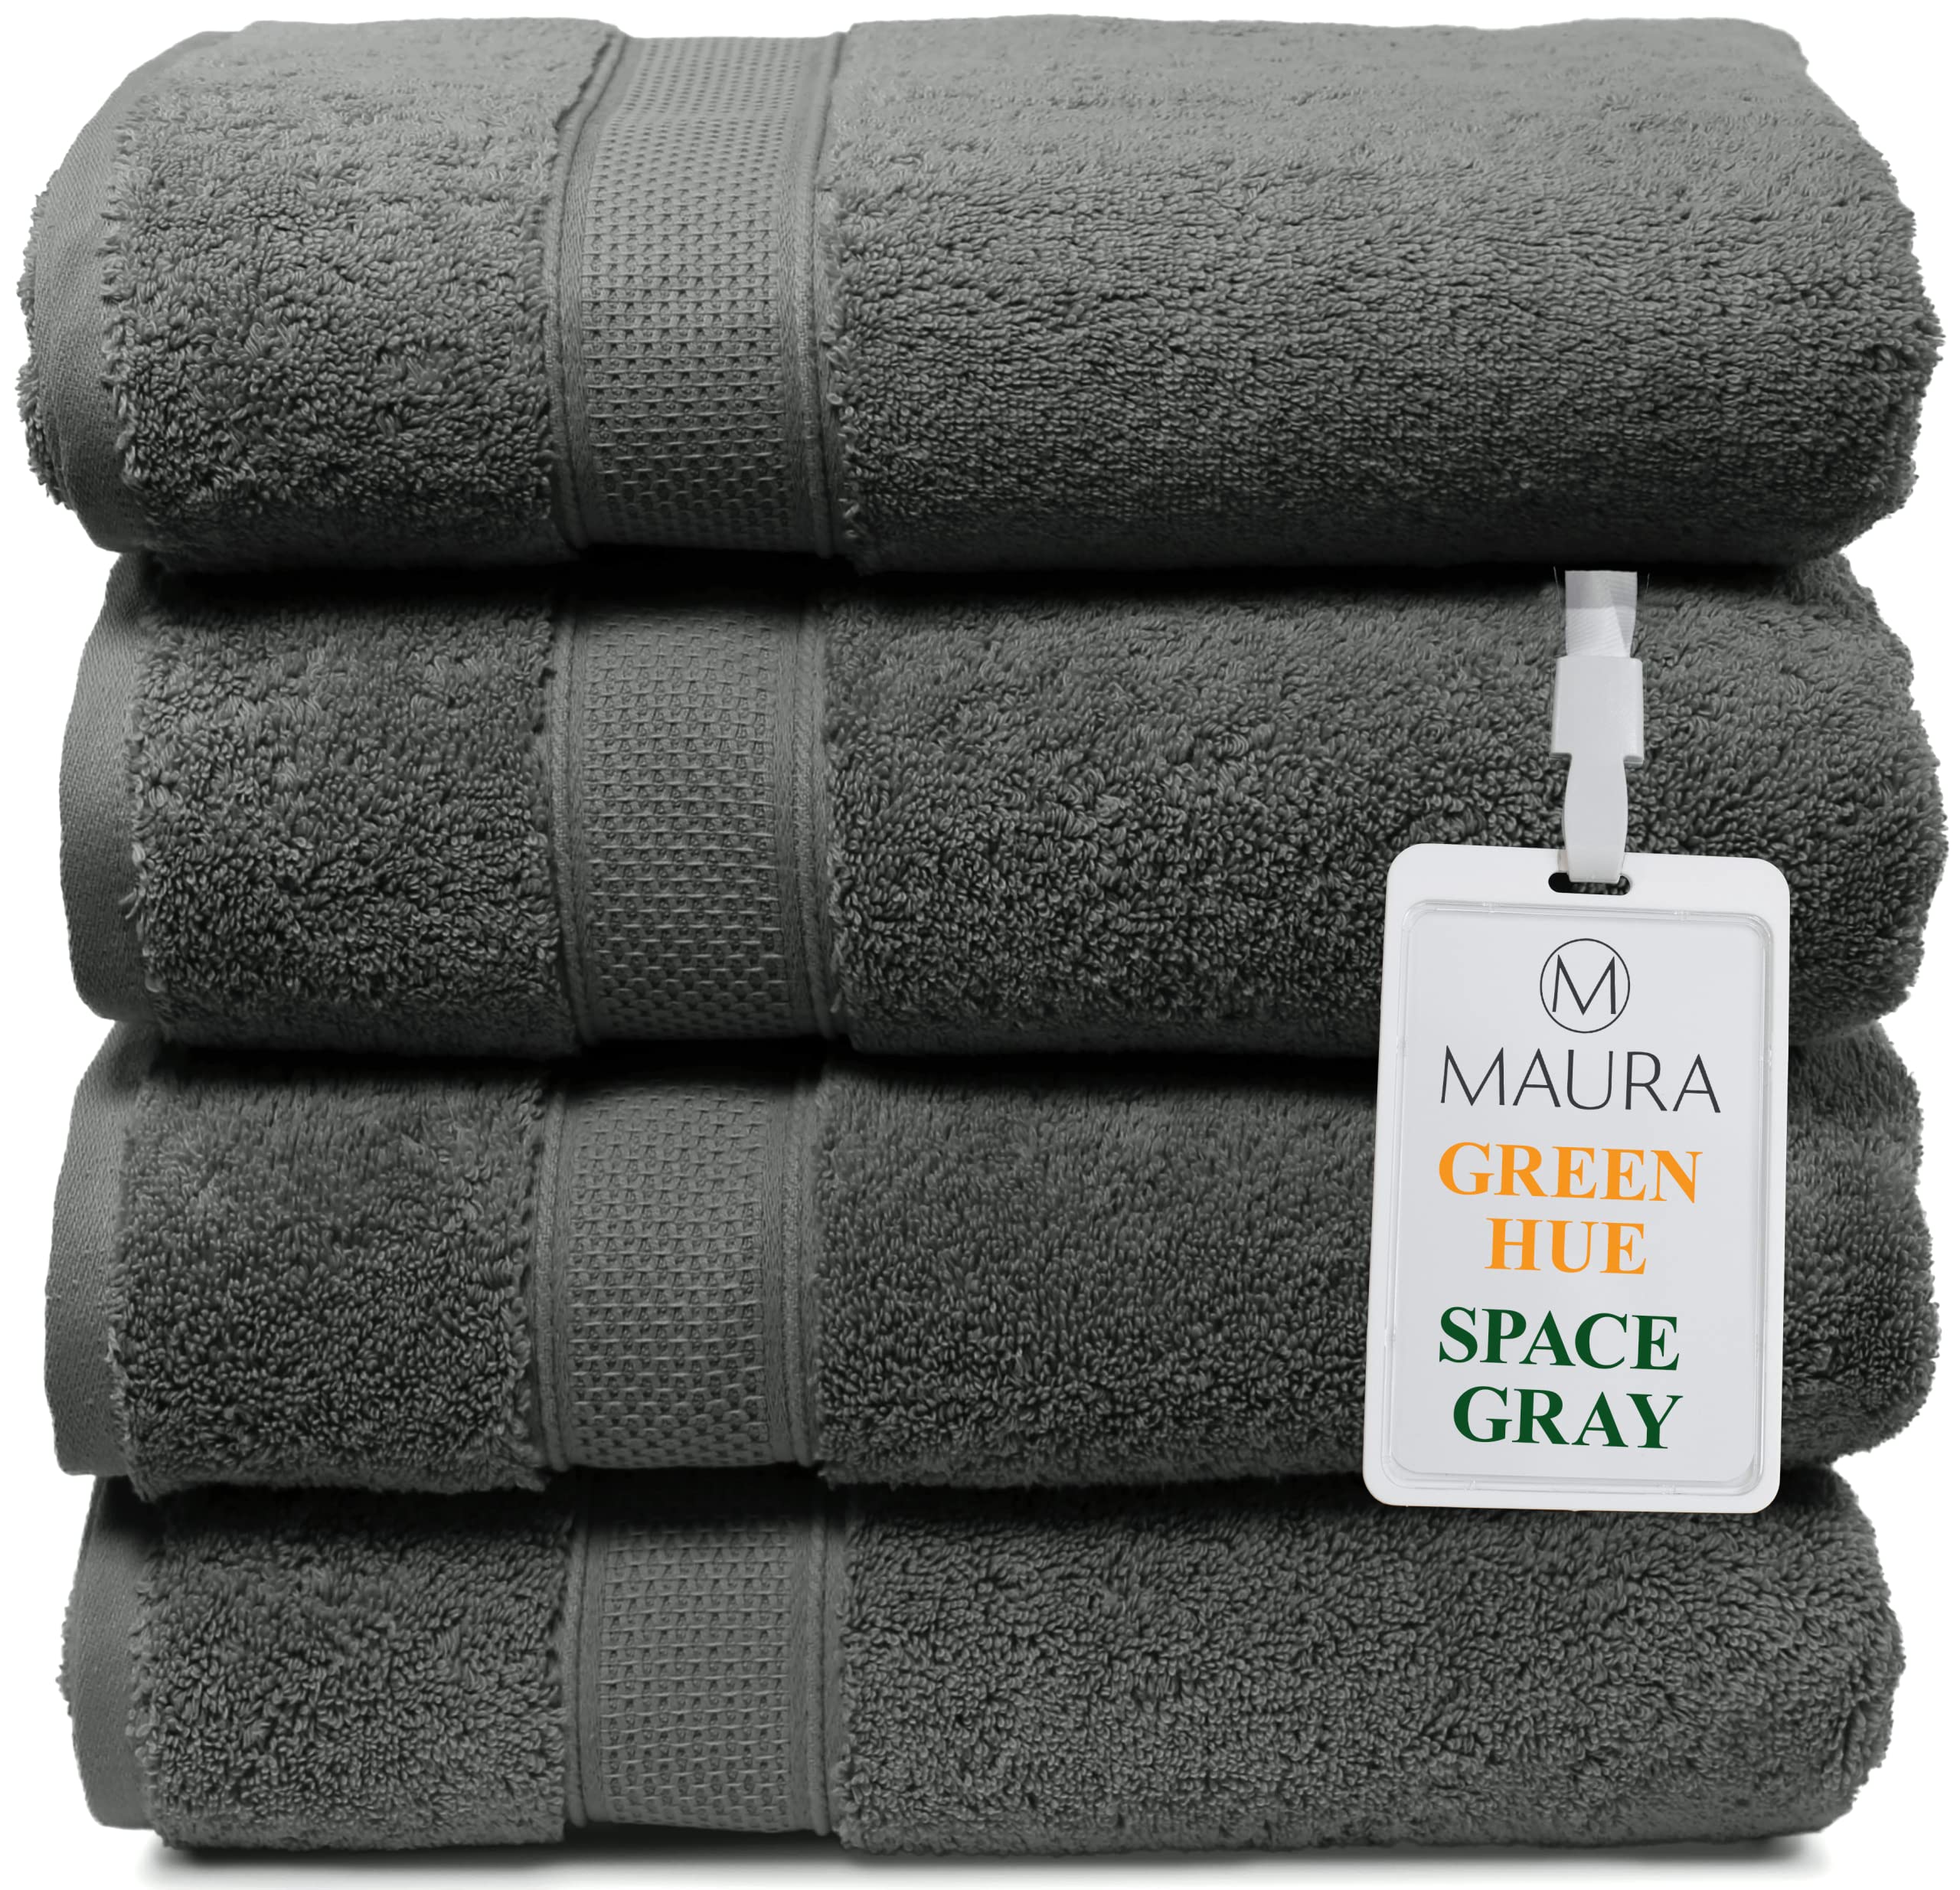 Book Cover Luxurious Extra Large Turkish Bath Towel Sets 4pc - Ultra Soft, Thick, Plush & Highly Absorbent Premium Hotel & Spa Quality Oversized Cotton Towels for Adults - Enhance Your Bathroom - Space Gray Bath Towel (4-Pack) Space Gray